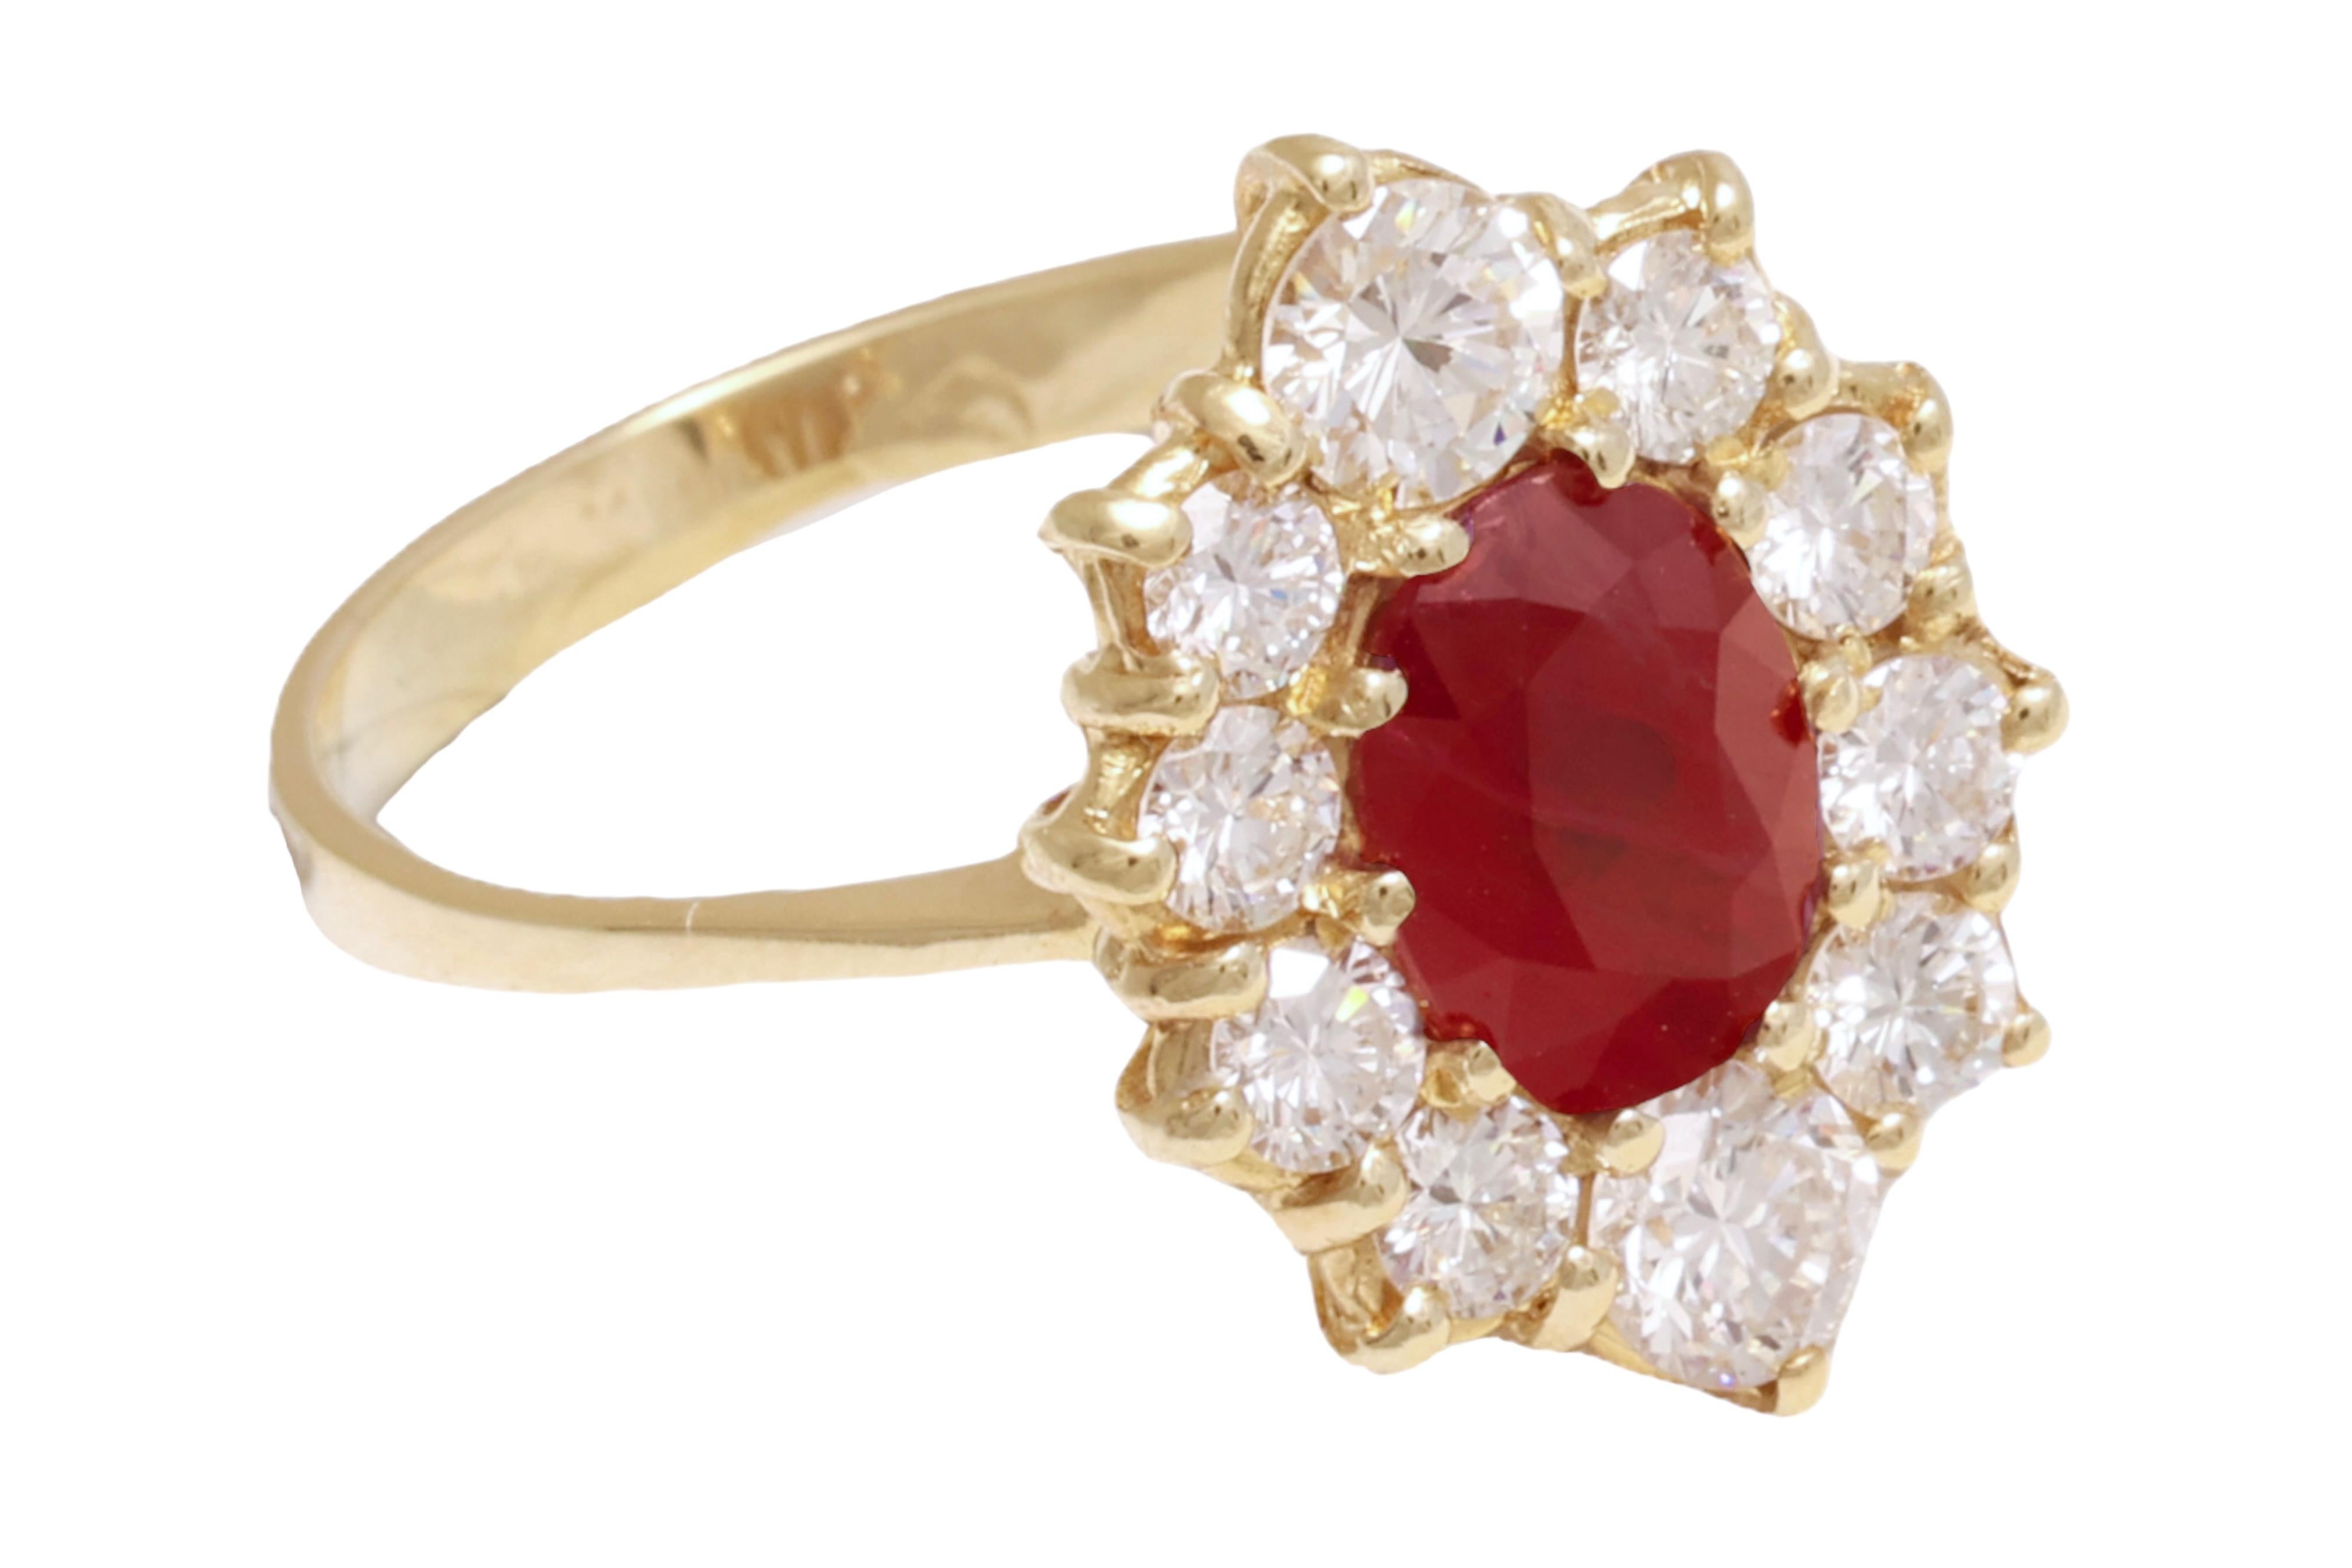 Stunning 18 kt Yellow Gold 1.71 Carat Ruby Ring with Diamonds

Ruby: 1.71 Carat, Length 5.7 x height 7.7 mm

Diamonds: 10 brilliant cut diamonds, Nice clarity and cut together 1 ct.

Material: 18 kt yellow gold

Total weight: 4.6 gram / 0.165 oz /